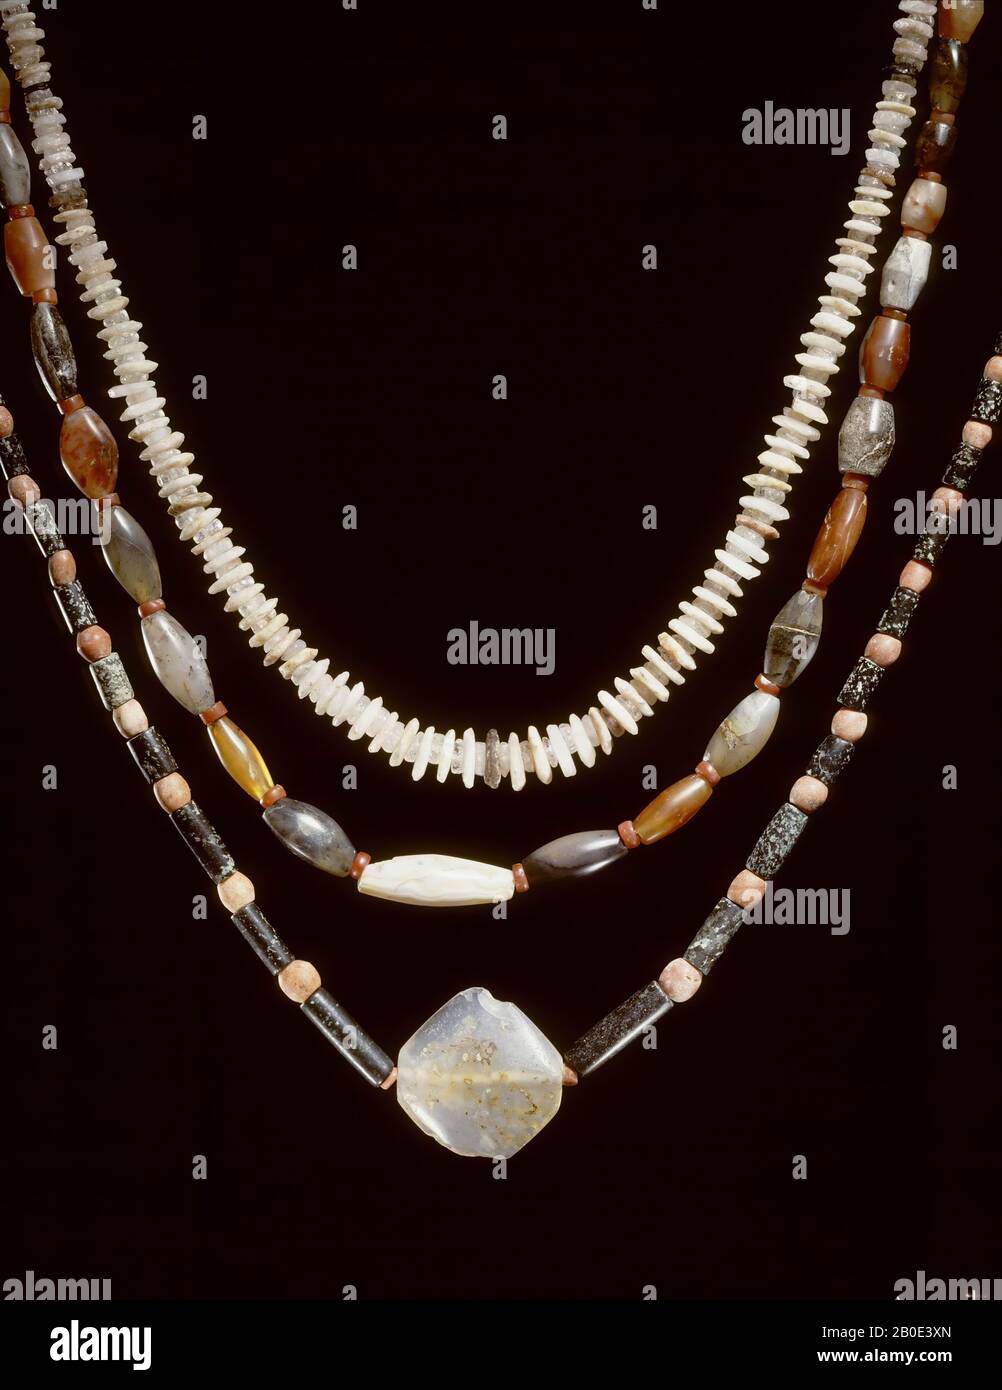 A necklace consisting of 191 writing-like, flat-beaded beads of the same thickness. The beads have two forms: one with a constant diameter, the second with a diameter that increases towards the center of the chain. The first species, which acts as intermediate rings between the larger species, consists of transparent rock crystal, the second type consists of opaque crystal varieties in different pastel colors. Striking are two black (obsidian?) Beads and the large amber middle bead., Ornament, stone, rock crystal, crystal, obsidian ?, total length 51 cm, length folded 25 cm, width max. 1.7 cm Stock Photo